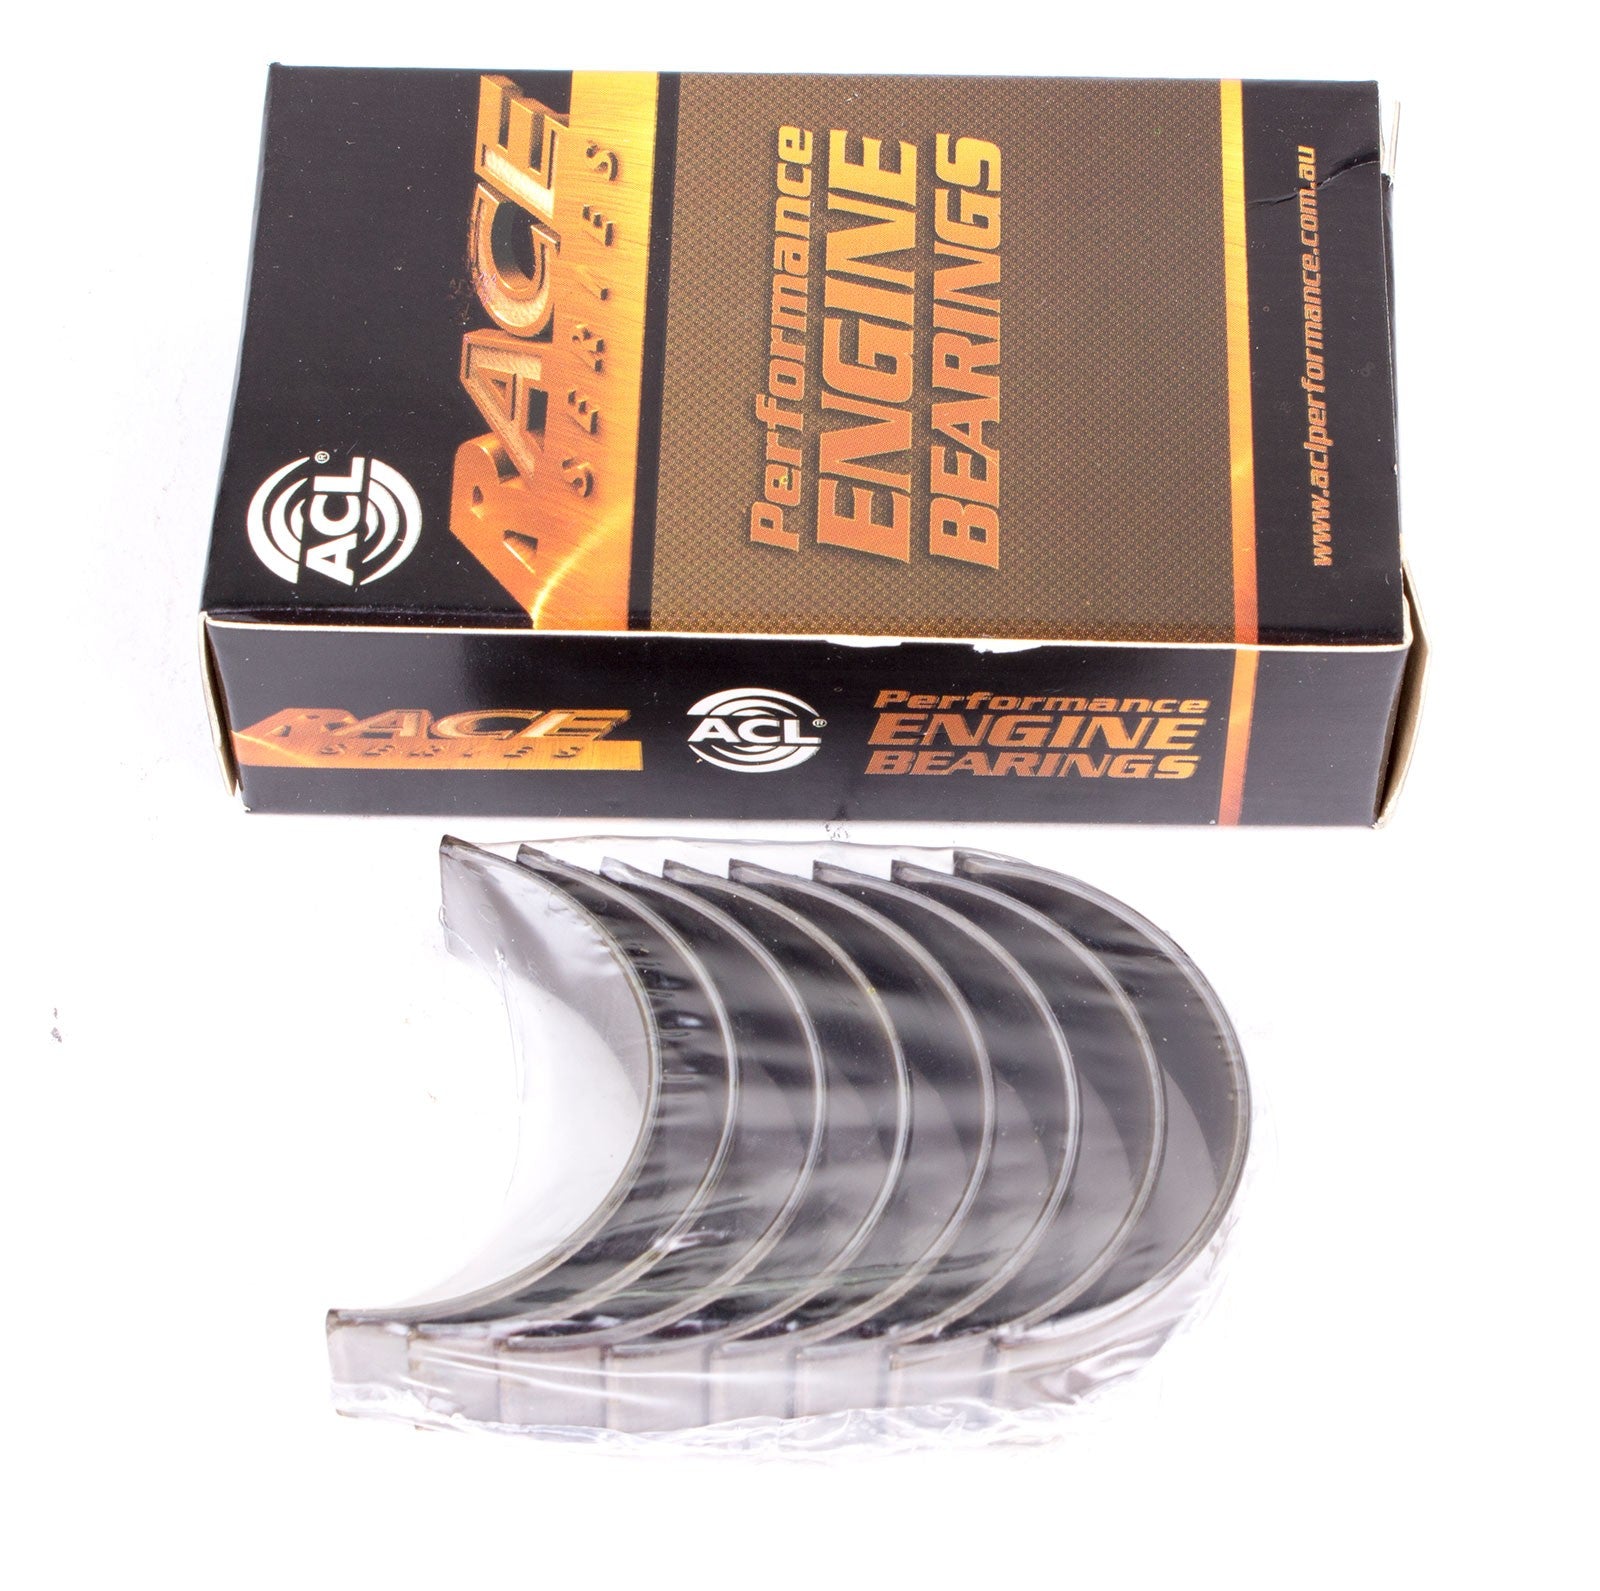 ACL 5M7296H-.025 Main bearing set (ACL Race Series) Photo-0 